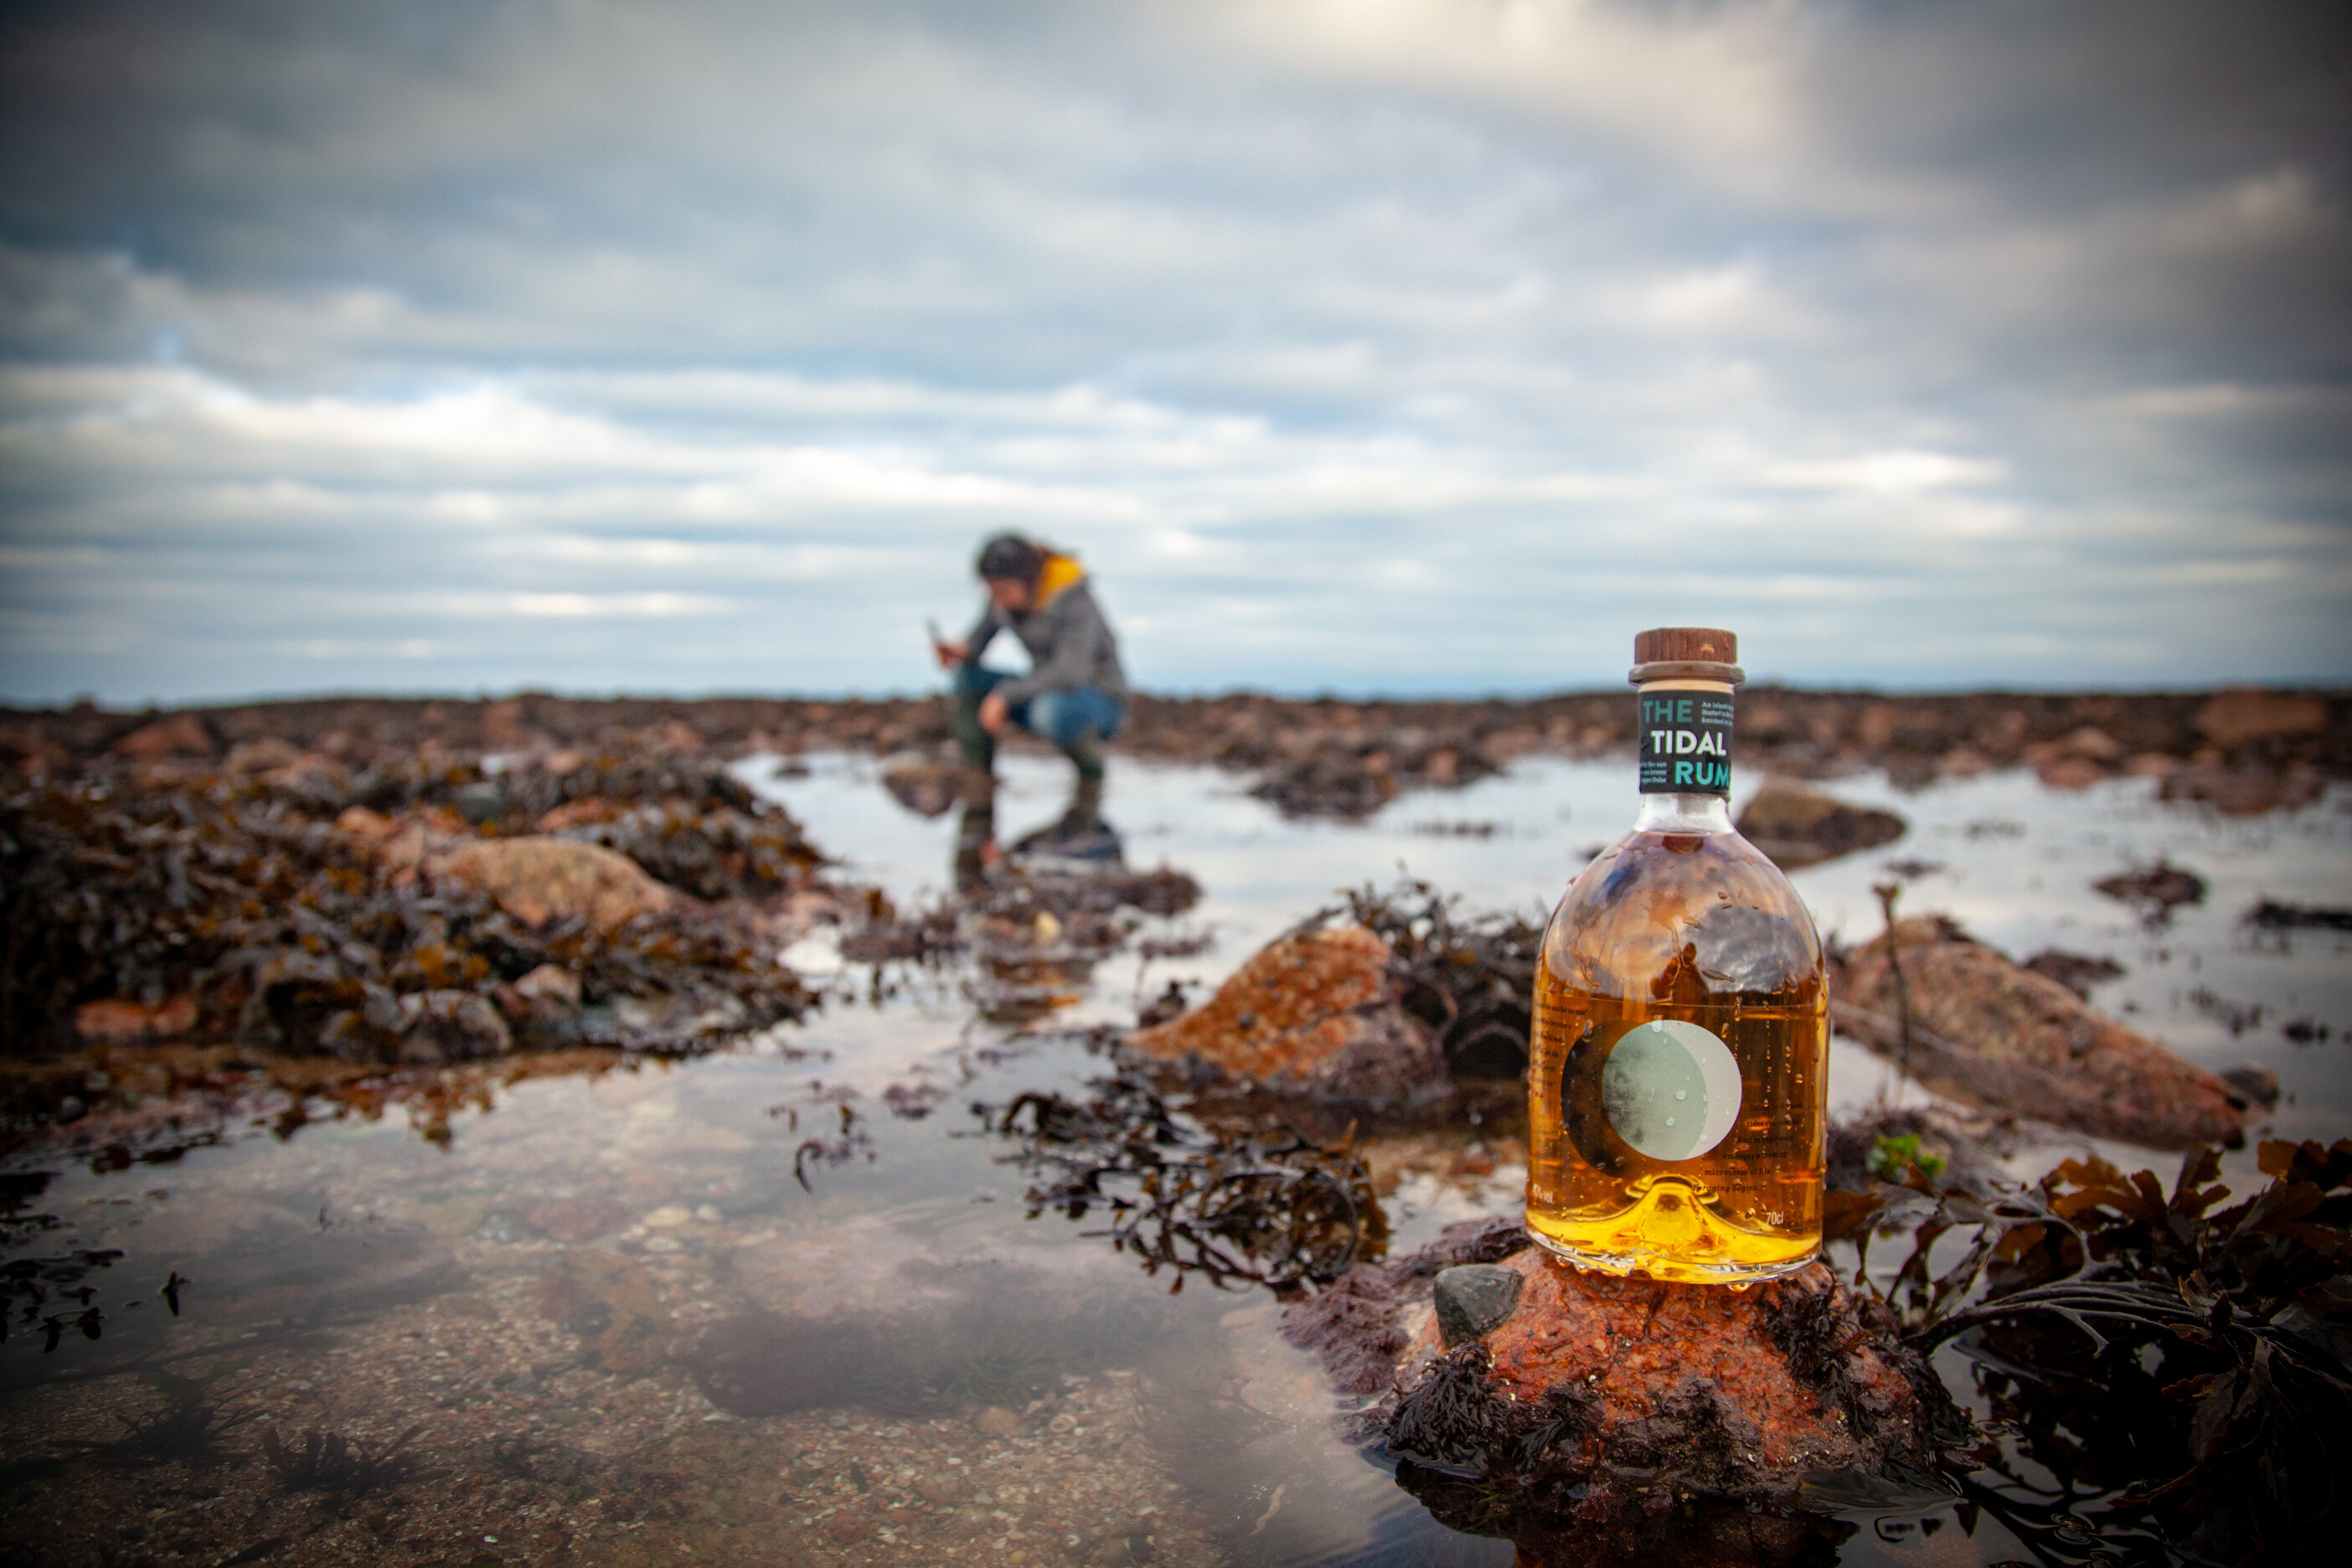 the tidal rum foraging for pepper dulse with kazz padidar.jpg